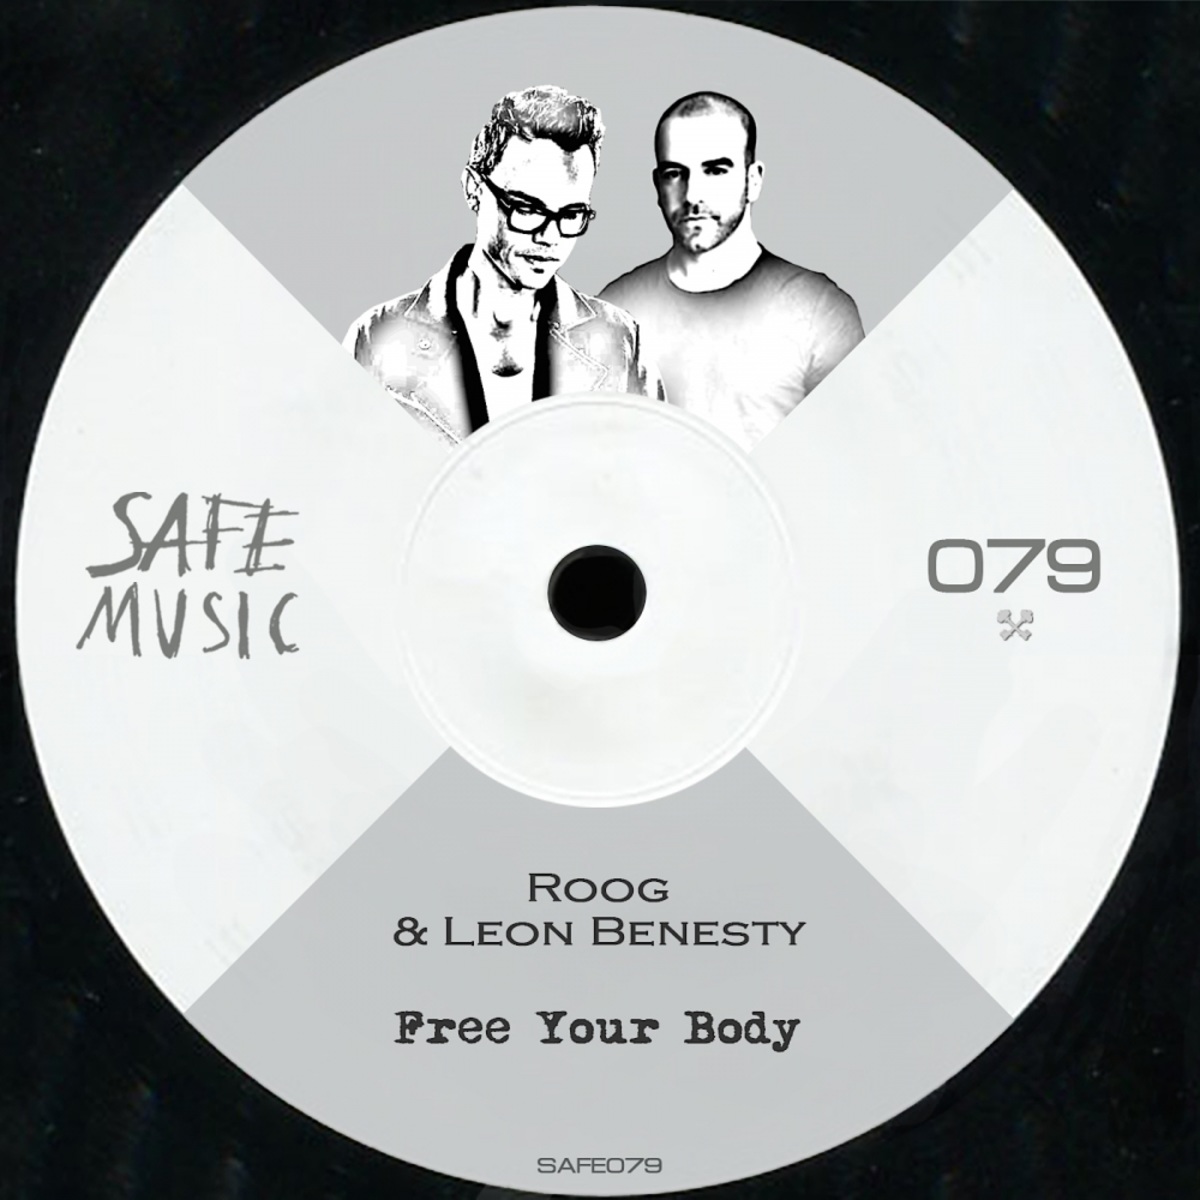 Roog & Leon Benesty - Free Your Body EP / SAFE MUSIC